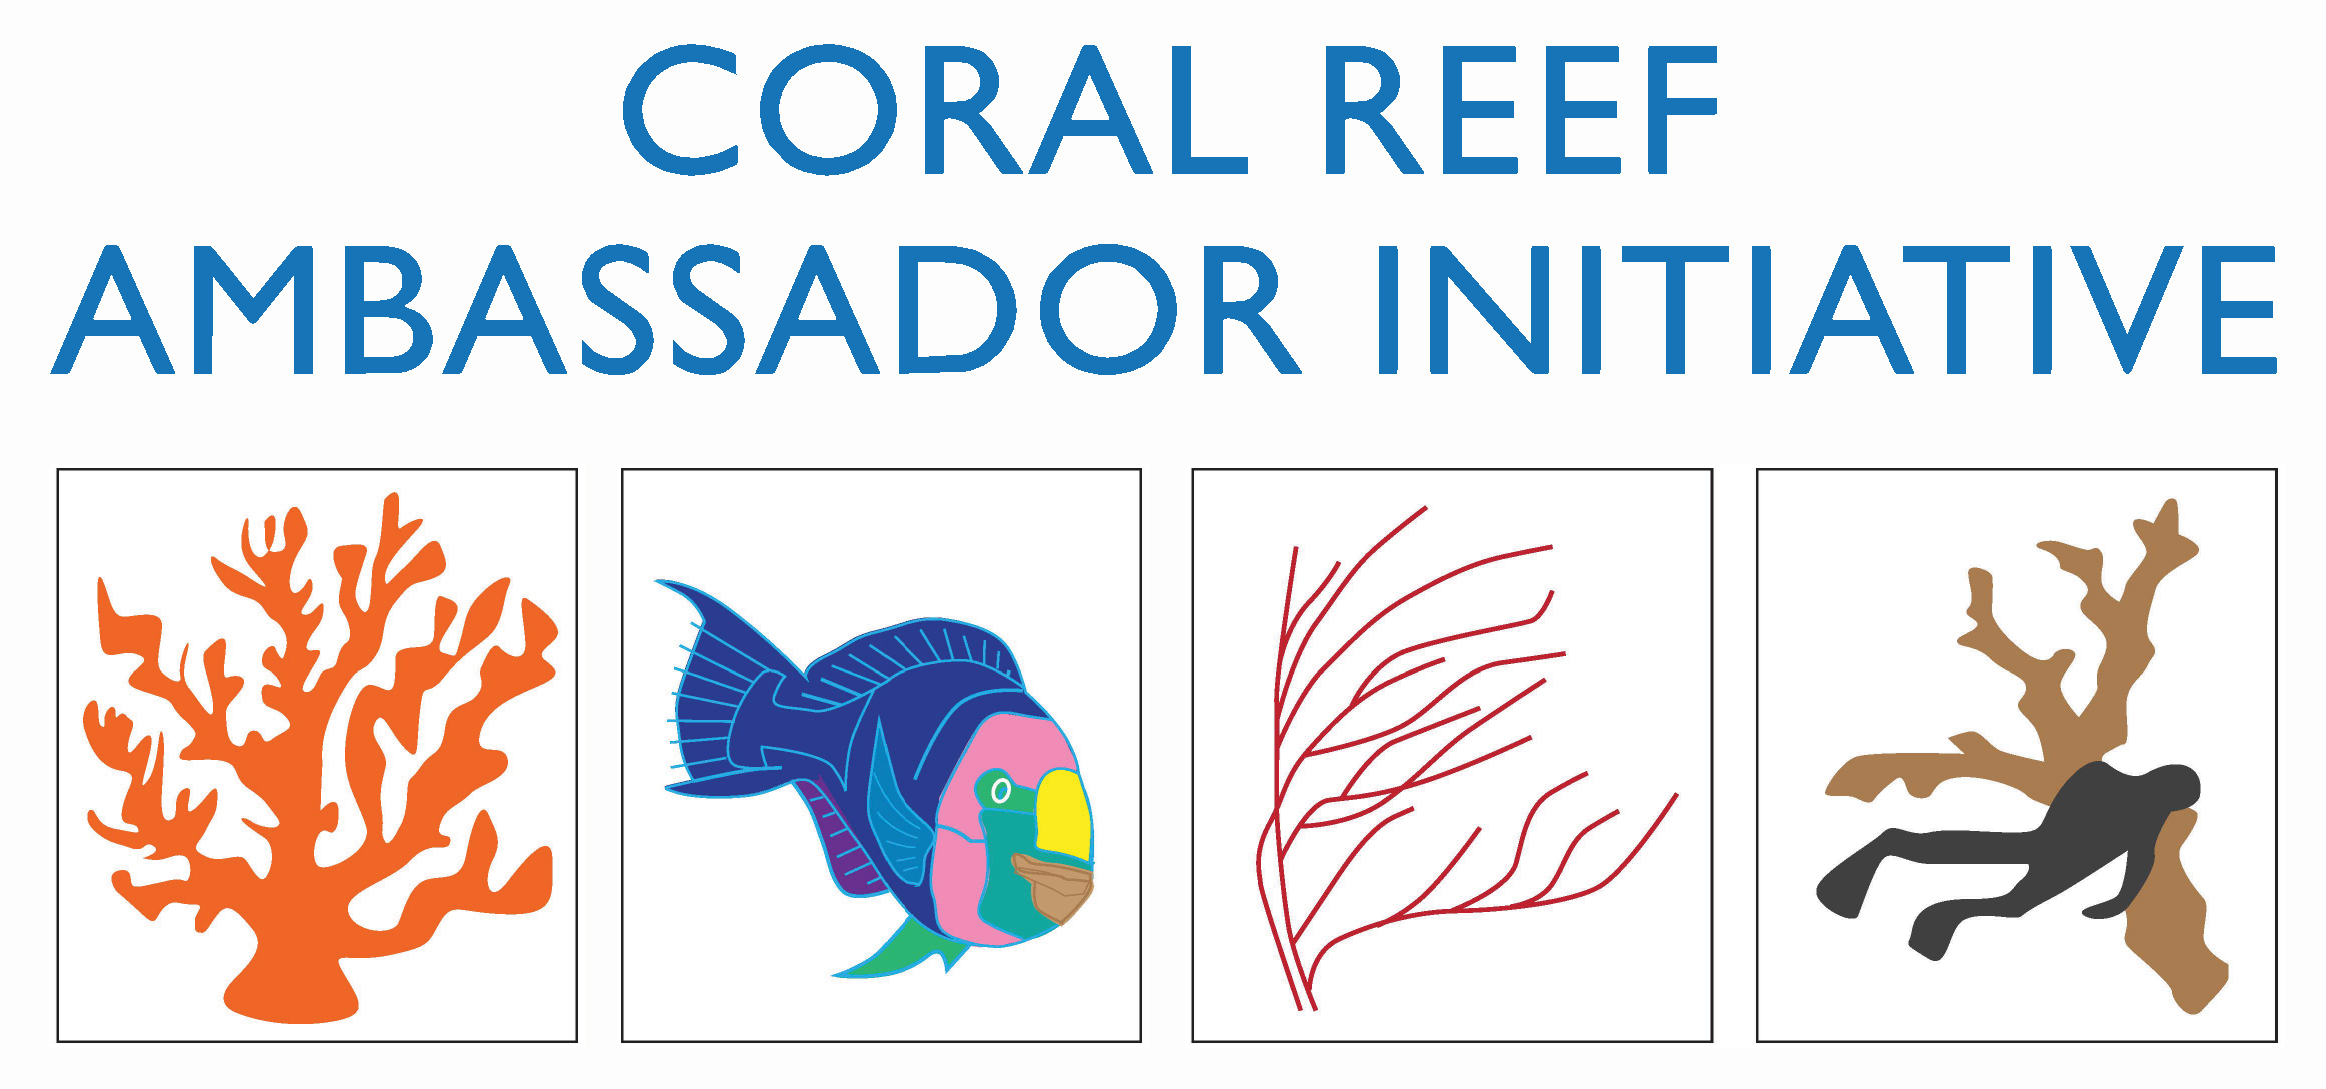 The official logo for the Coral Reef Ambassador Initiative.